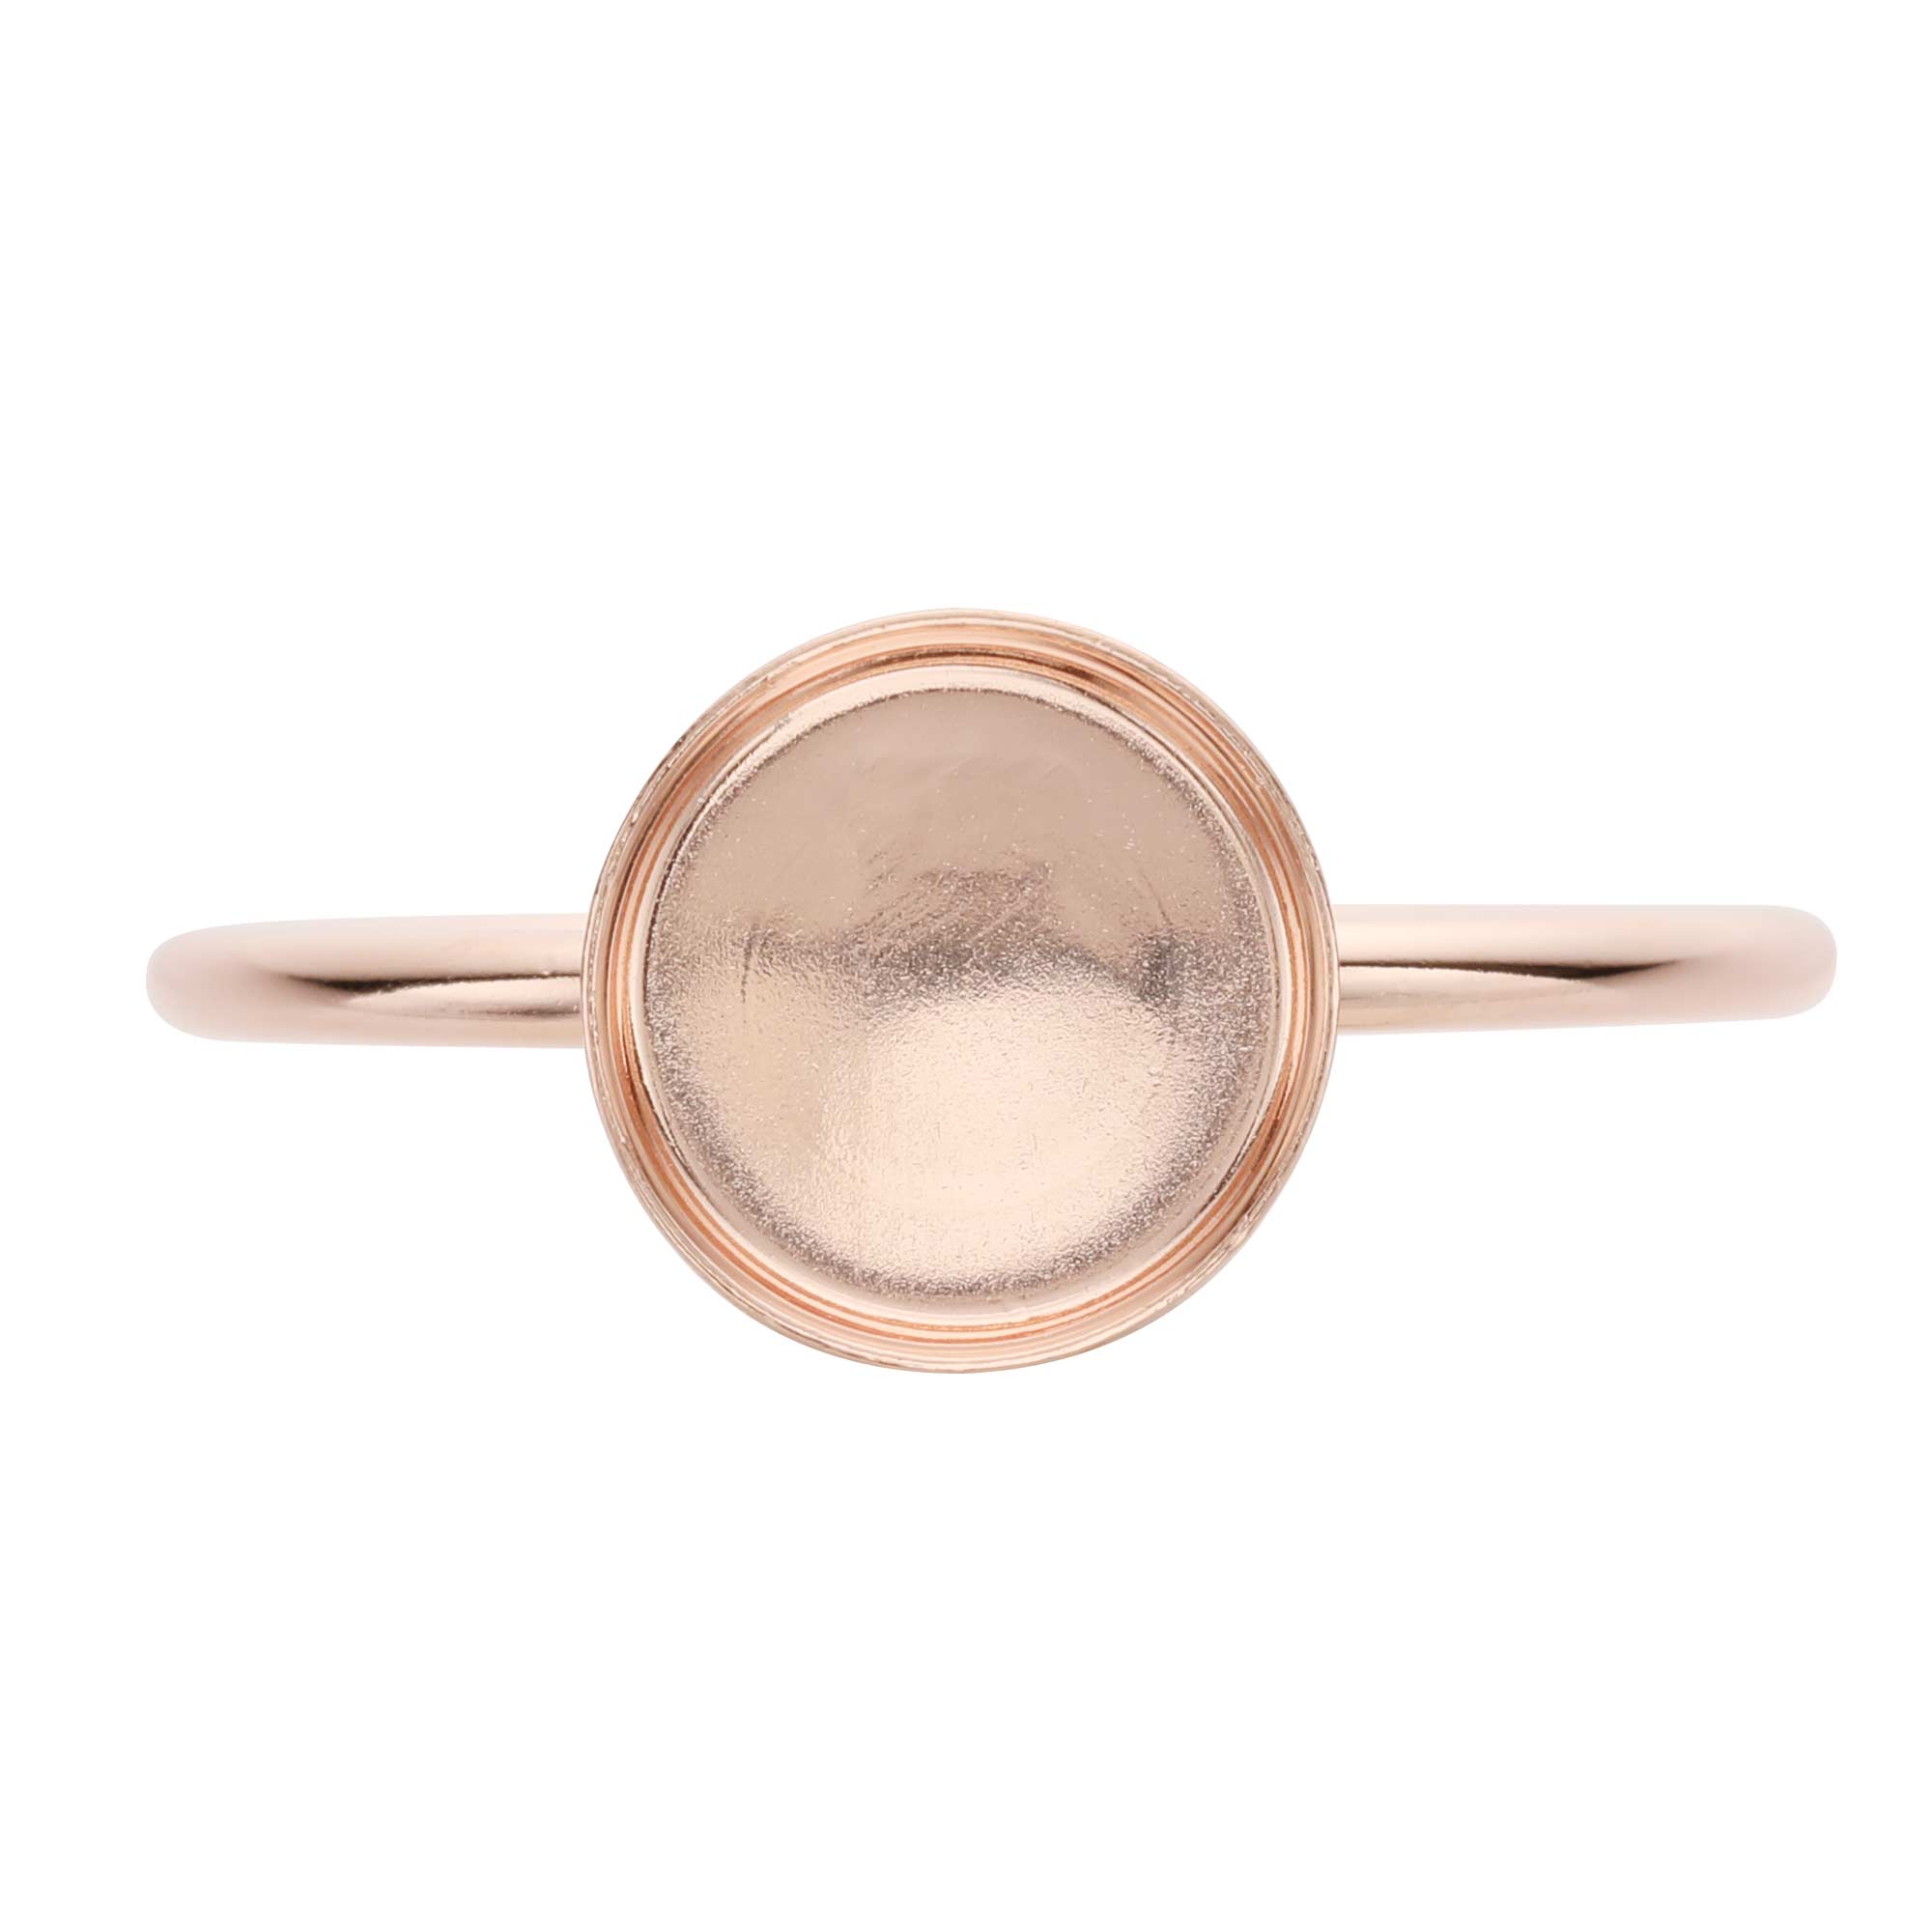 8MM Round Breast Milk Keepsake Resin Ring Settings,Solid Back Ring Bezel,DIY Rose Gold Plated Solid 925 Sterling Silver Ring Supplies 1215034 - Click Image to Close